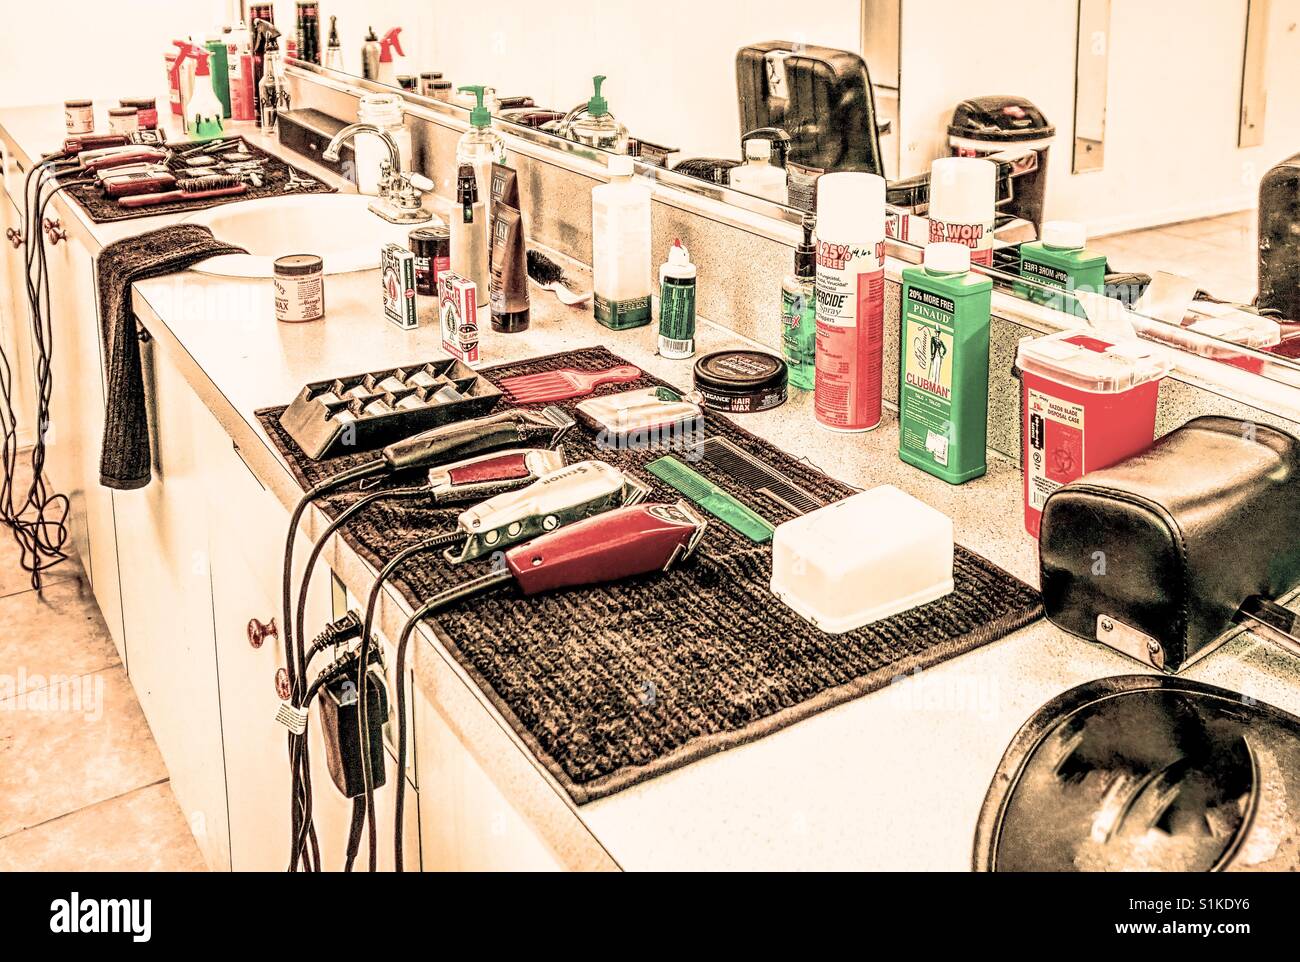 Barbershop haircut tools trimmers and clippers Stock Photo